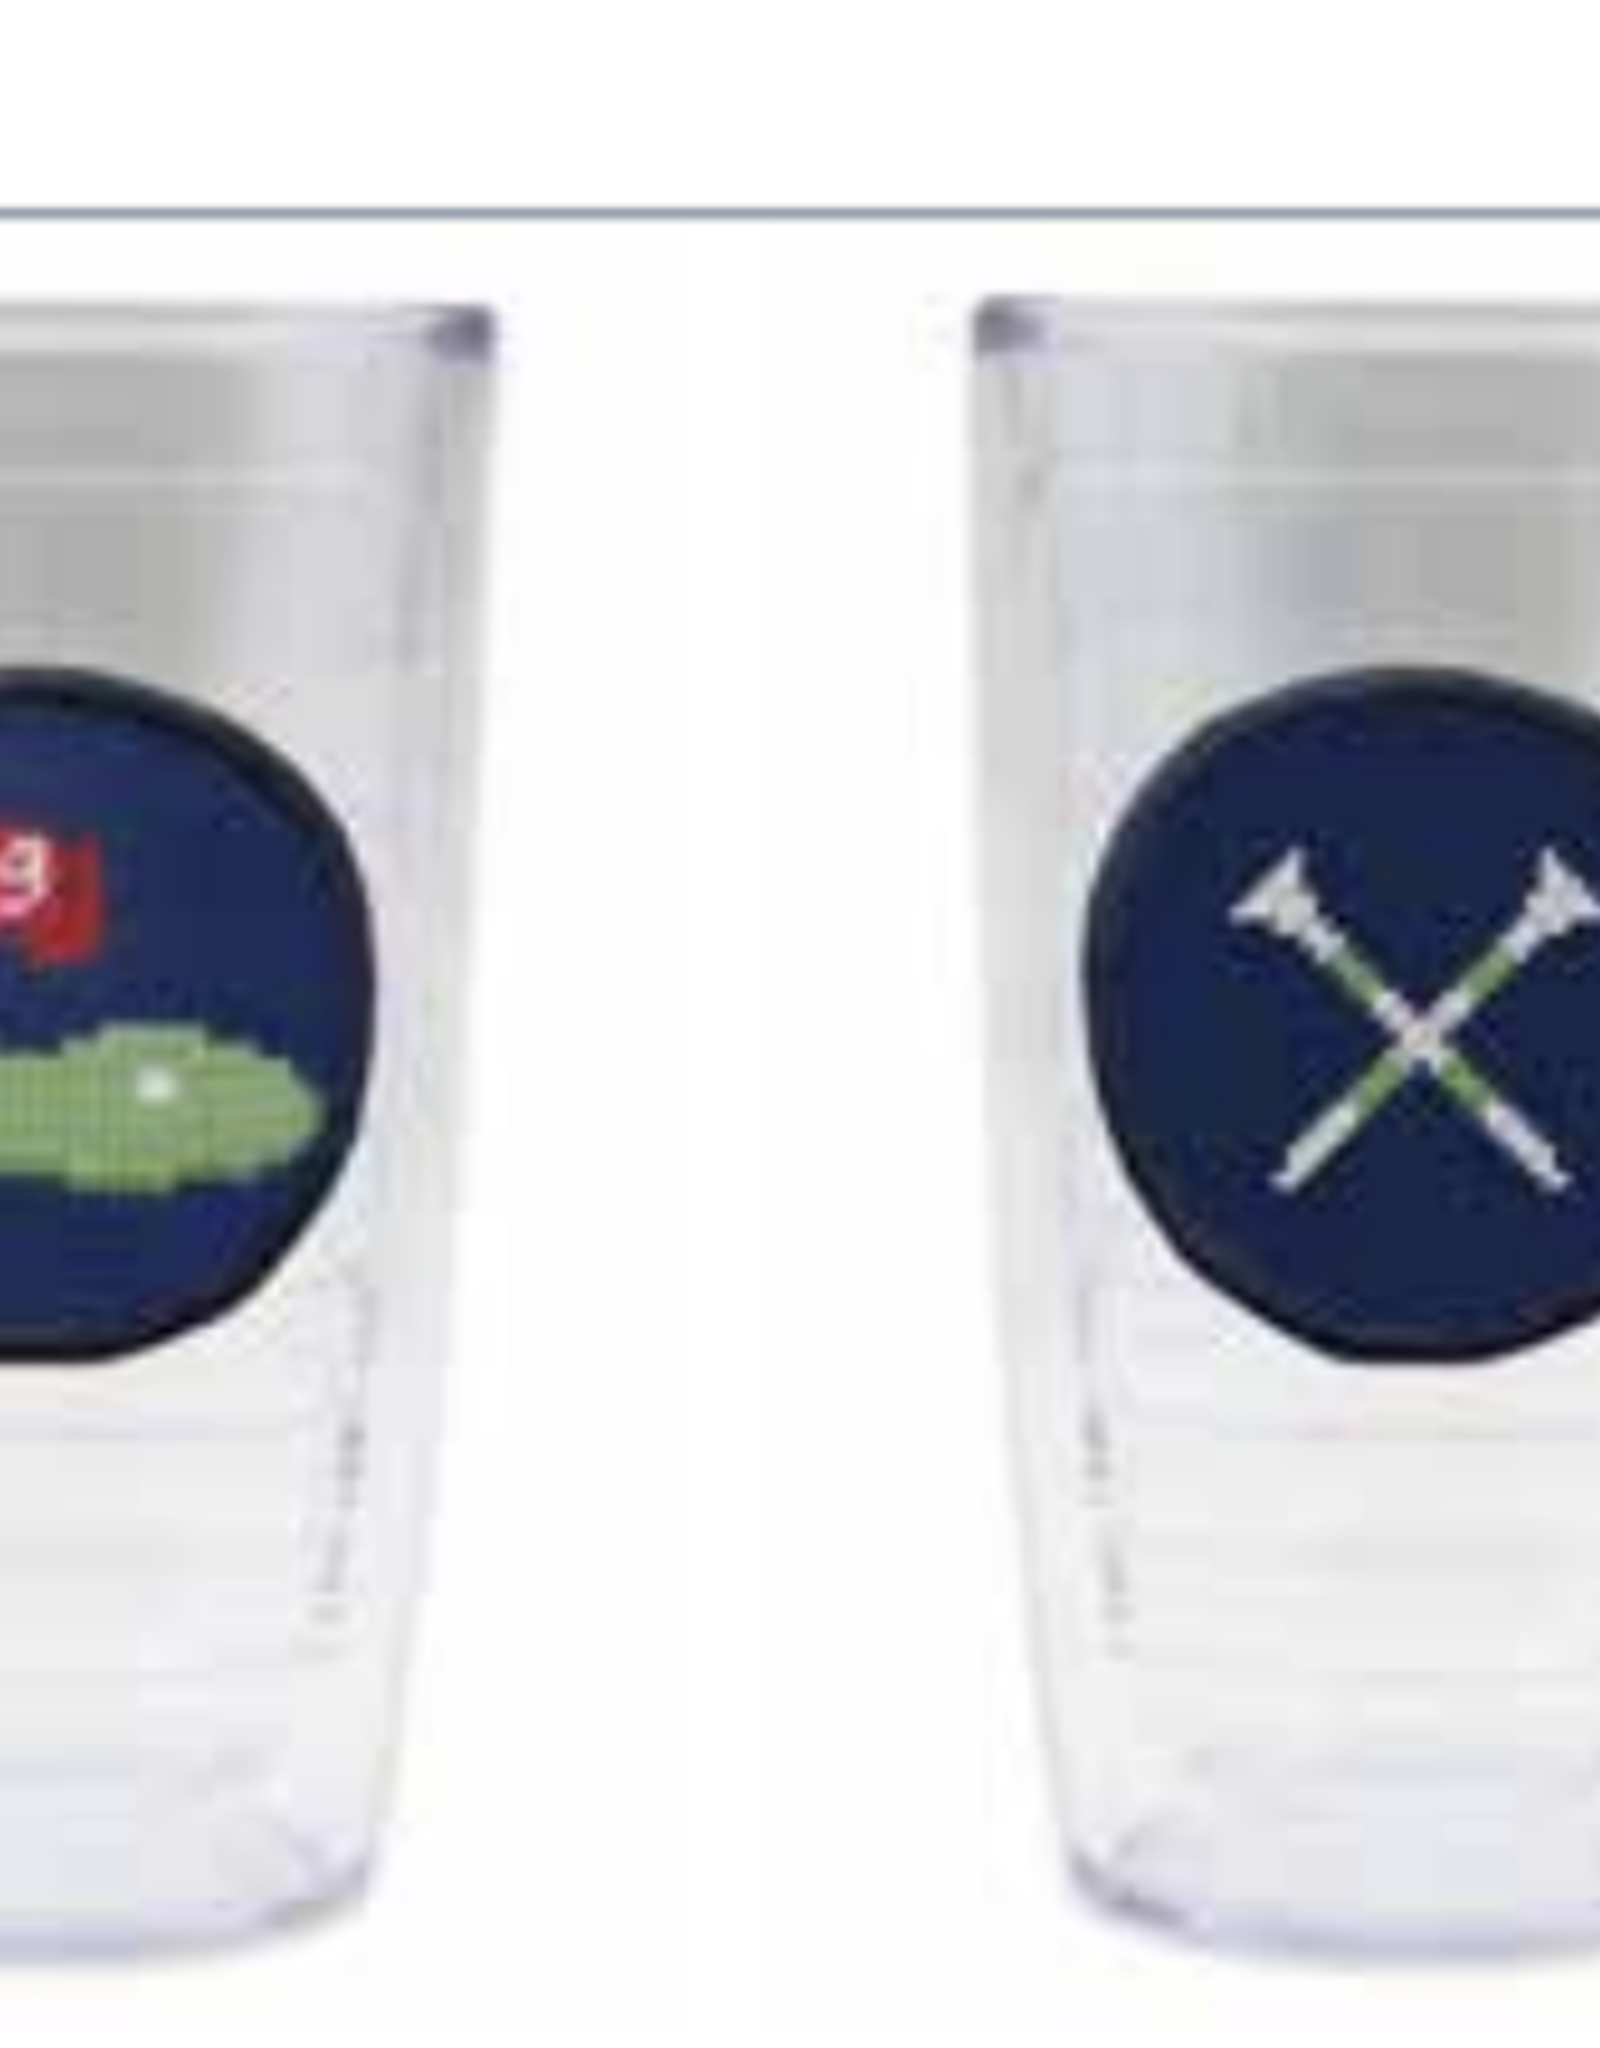 Smather's & Branson Tervis Tumbler Set of 4 Golf Icons